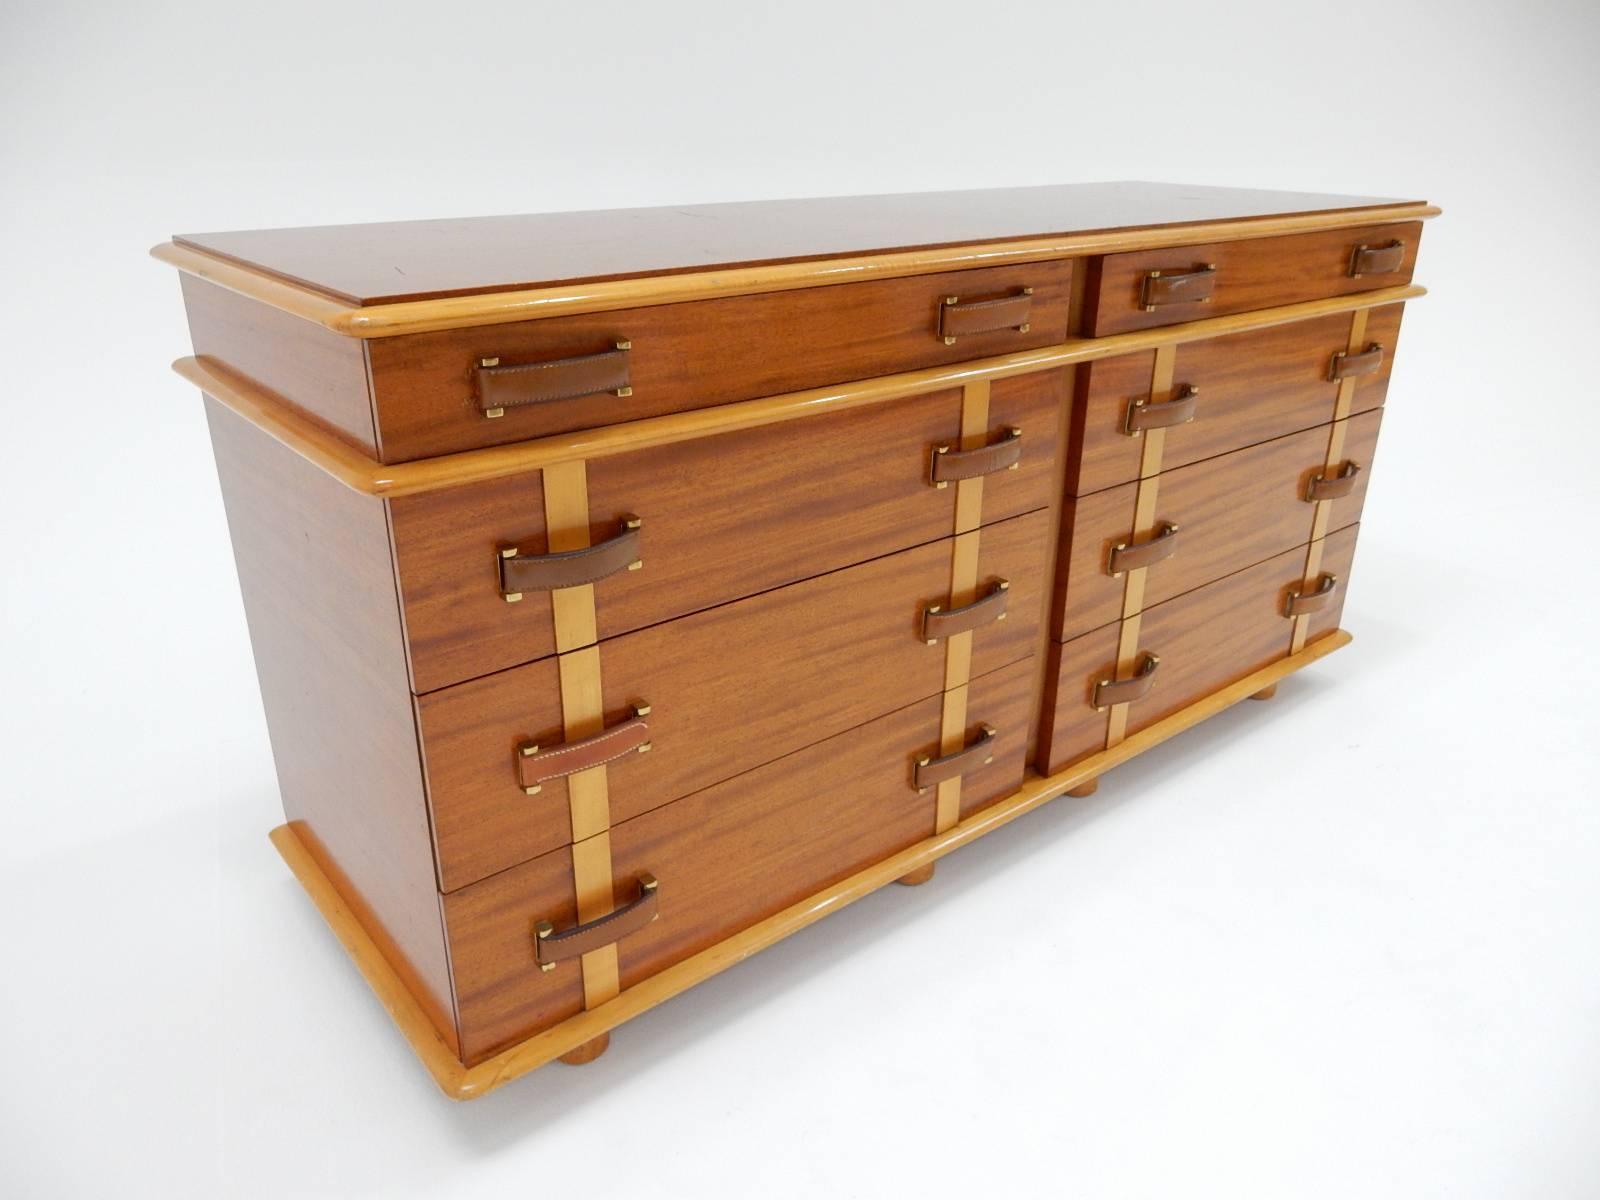 Chest of Drawers by Paul Frankl from the "Station Wagon" Series , circa 1940s.   In remarkable original condition, single owner provenance.   From the Station Wagon series by Paul Frankl for Johnson Furniture in 1945.  Eight Deep Drawers.